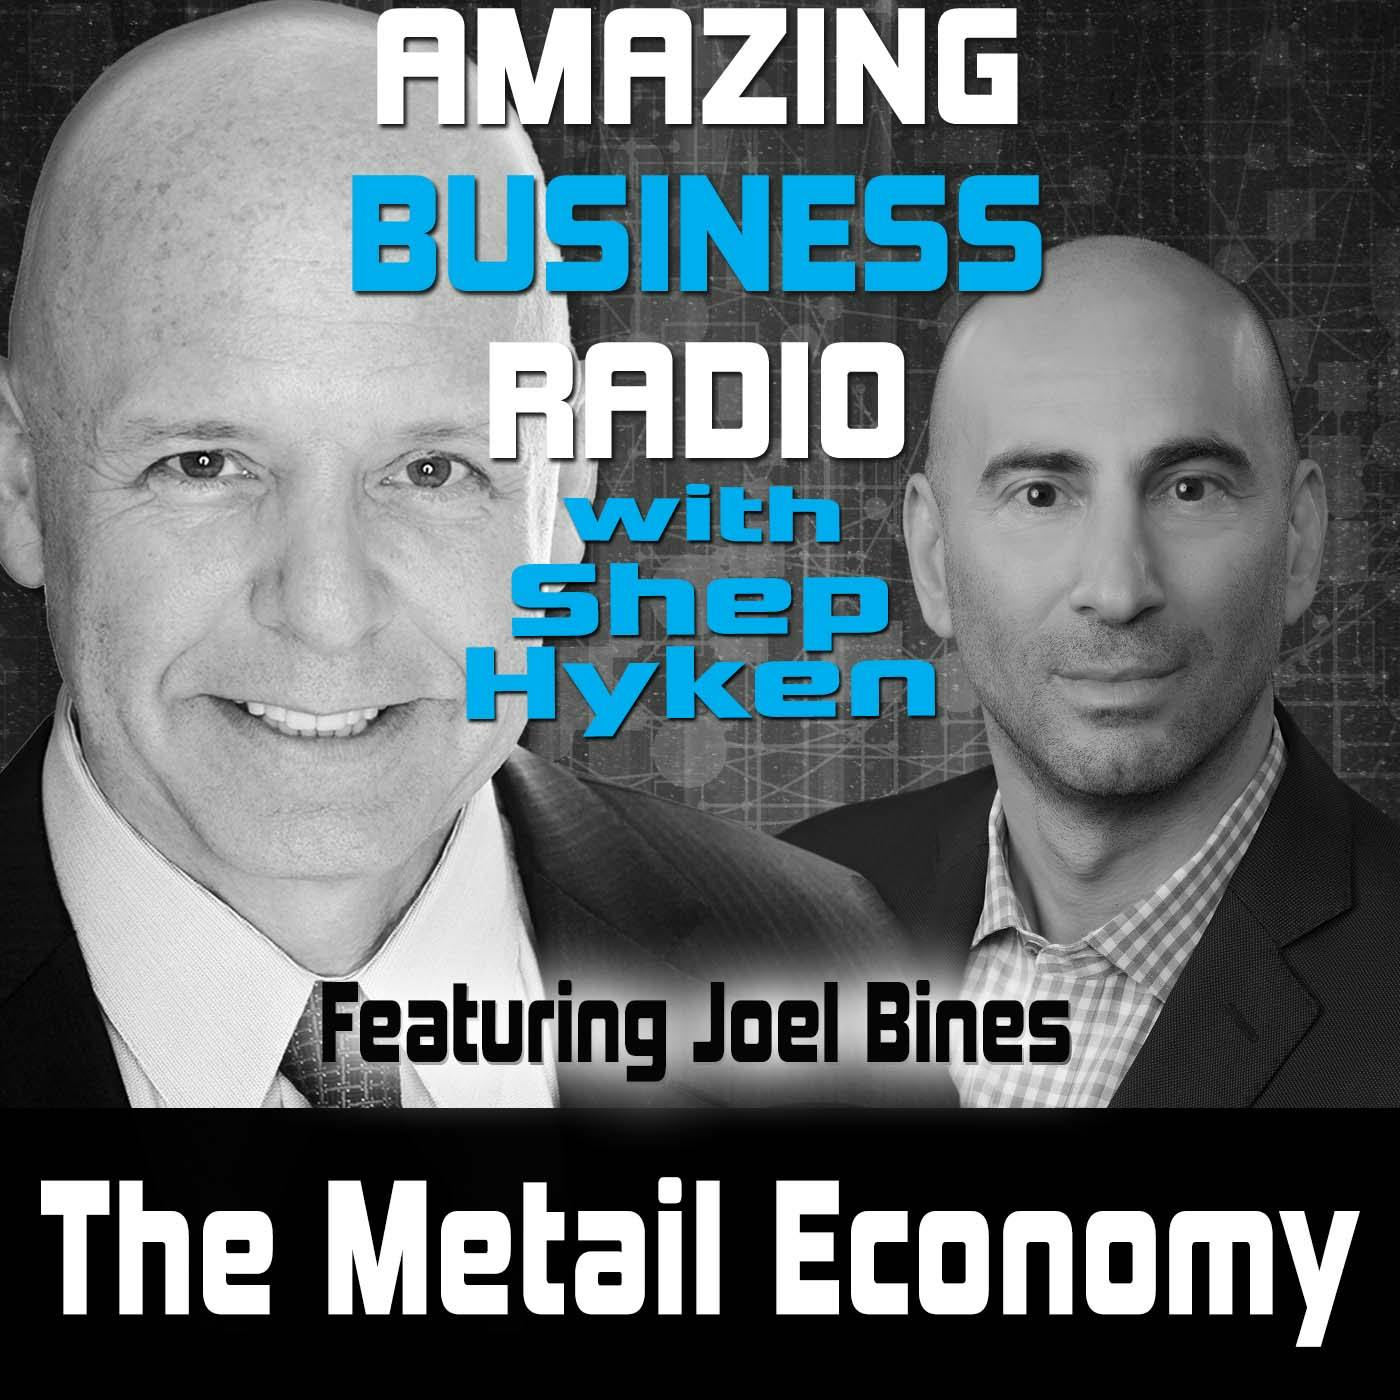 The Metail Economy Featuring Joel Bines